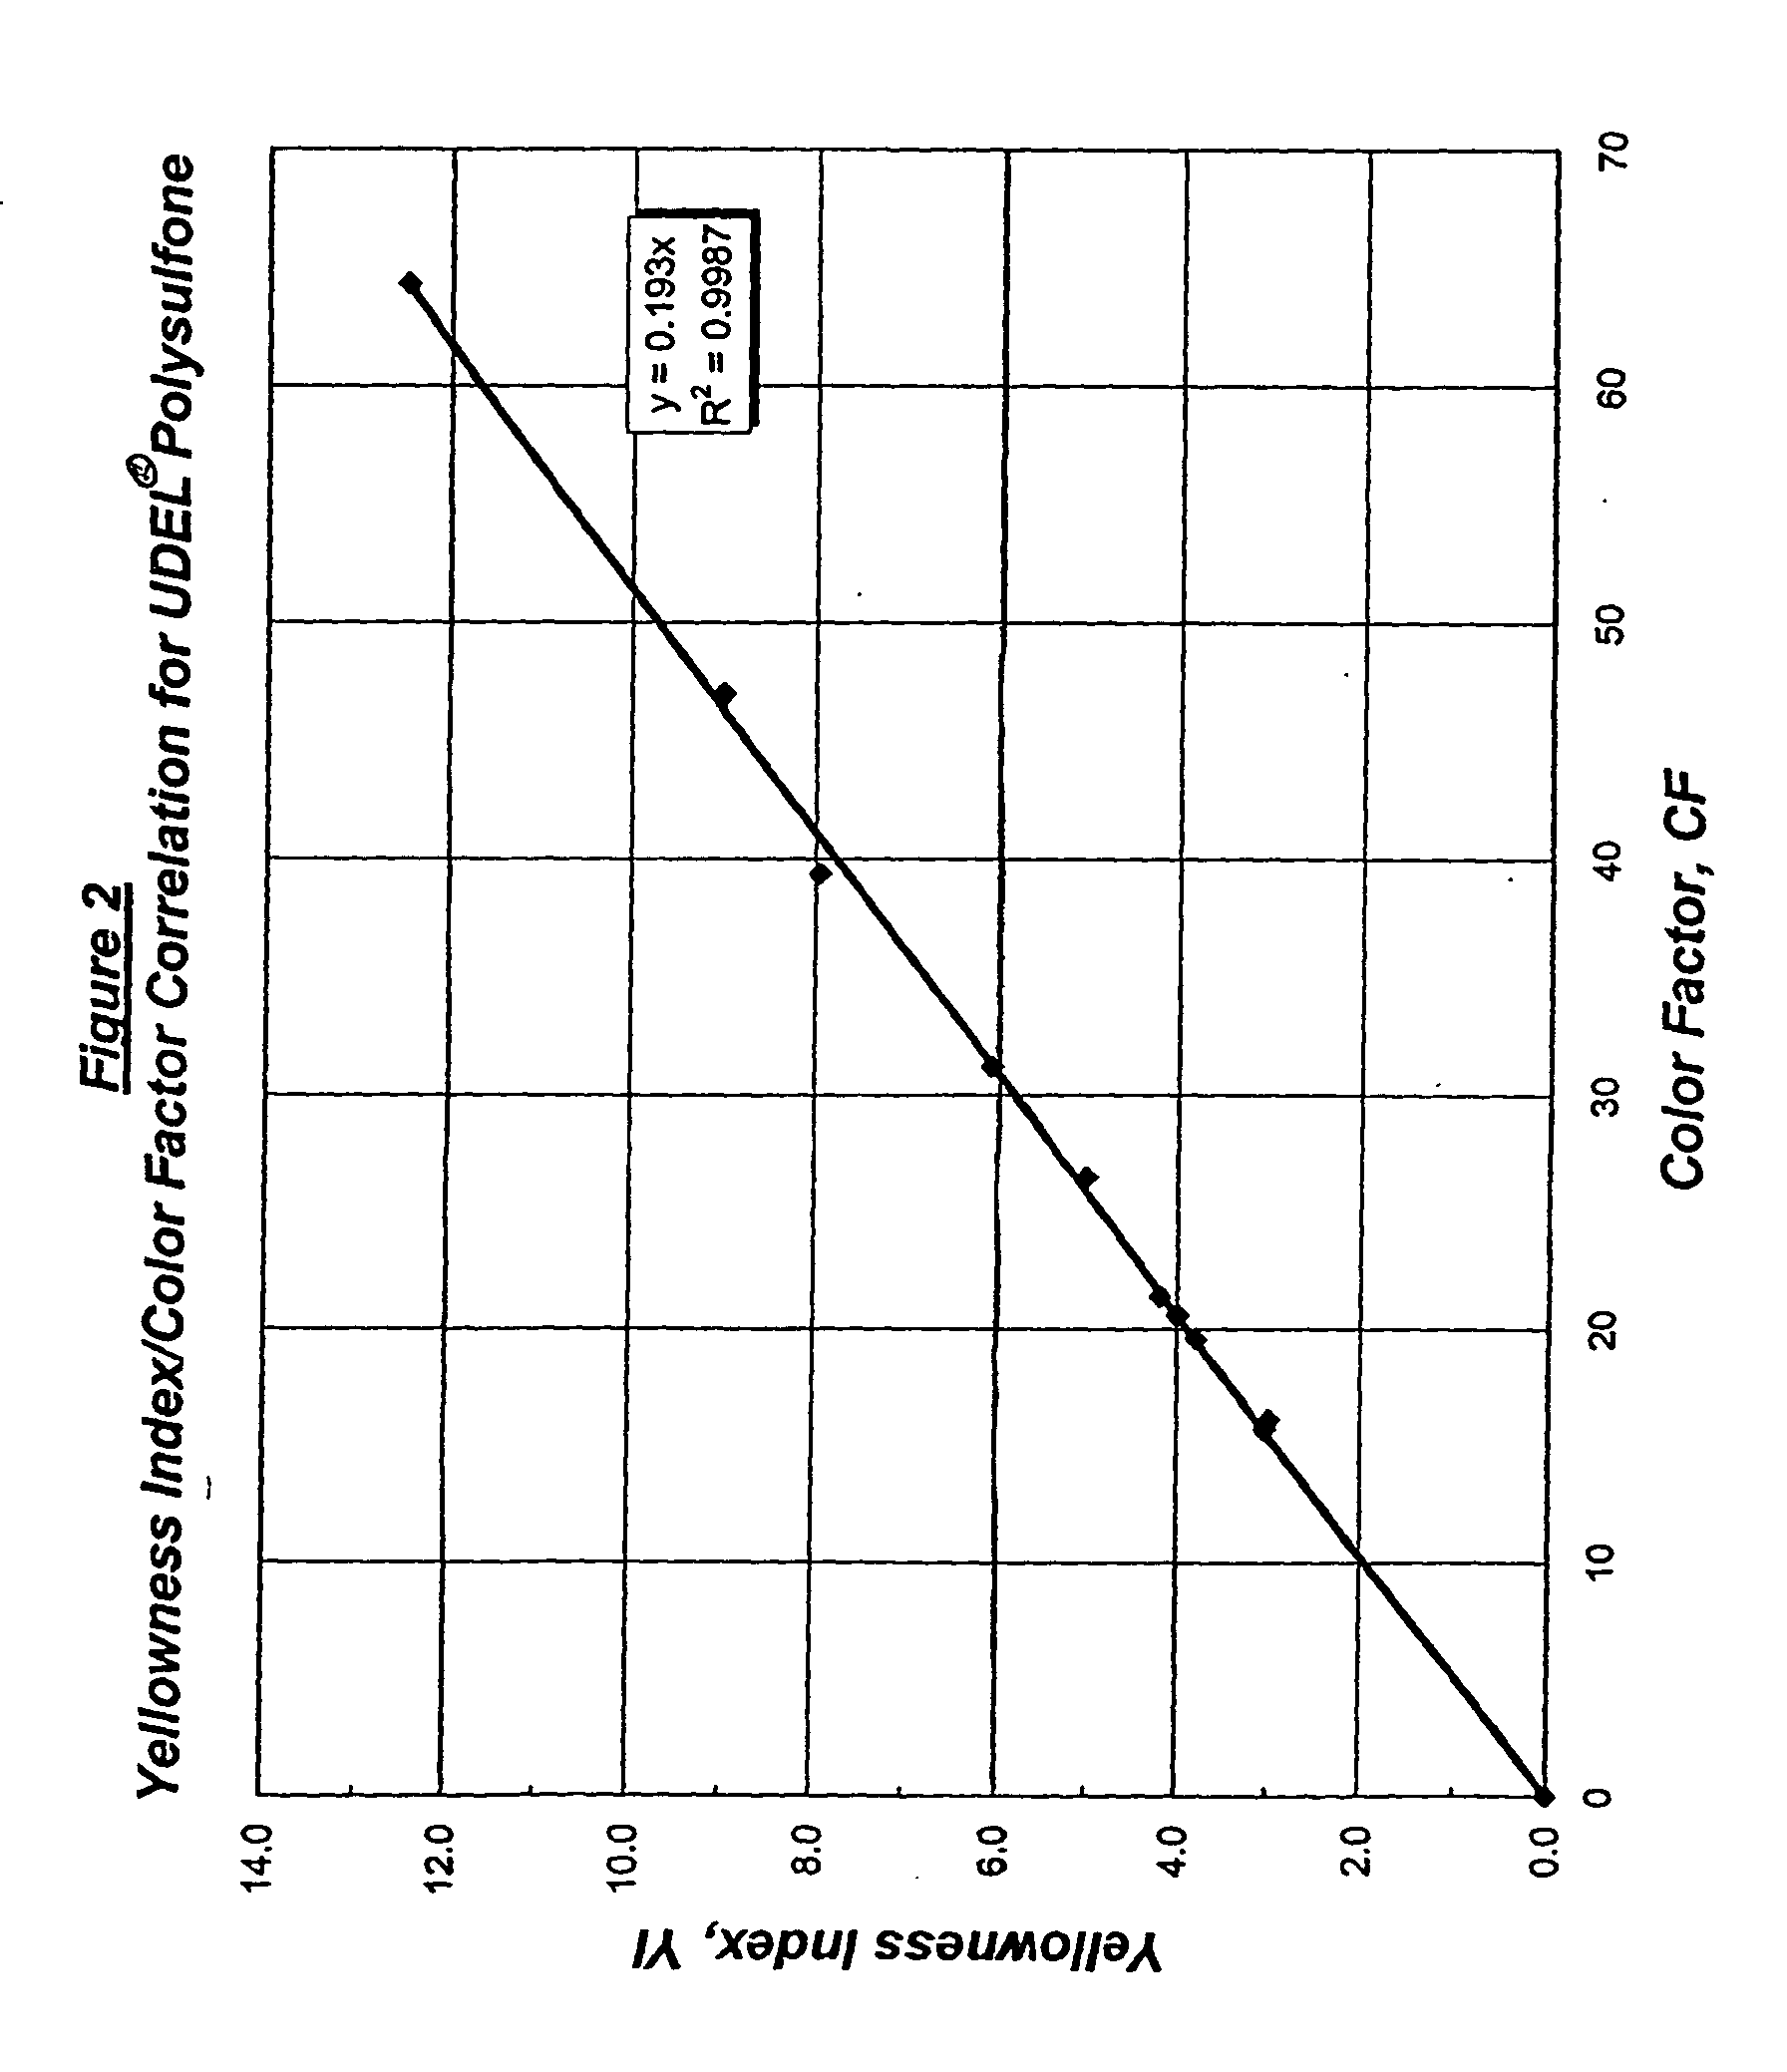 Polysulfone compositions exhibiting very low color and high light transmittance properties and articles made therefrom